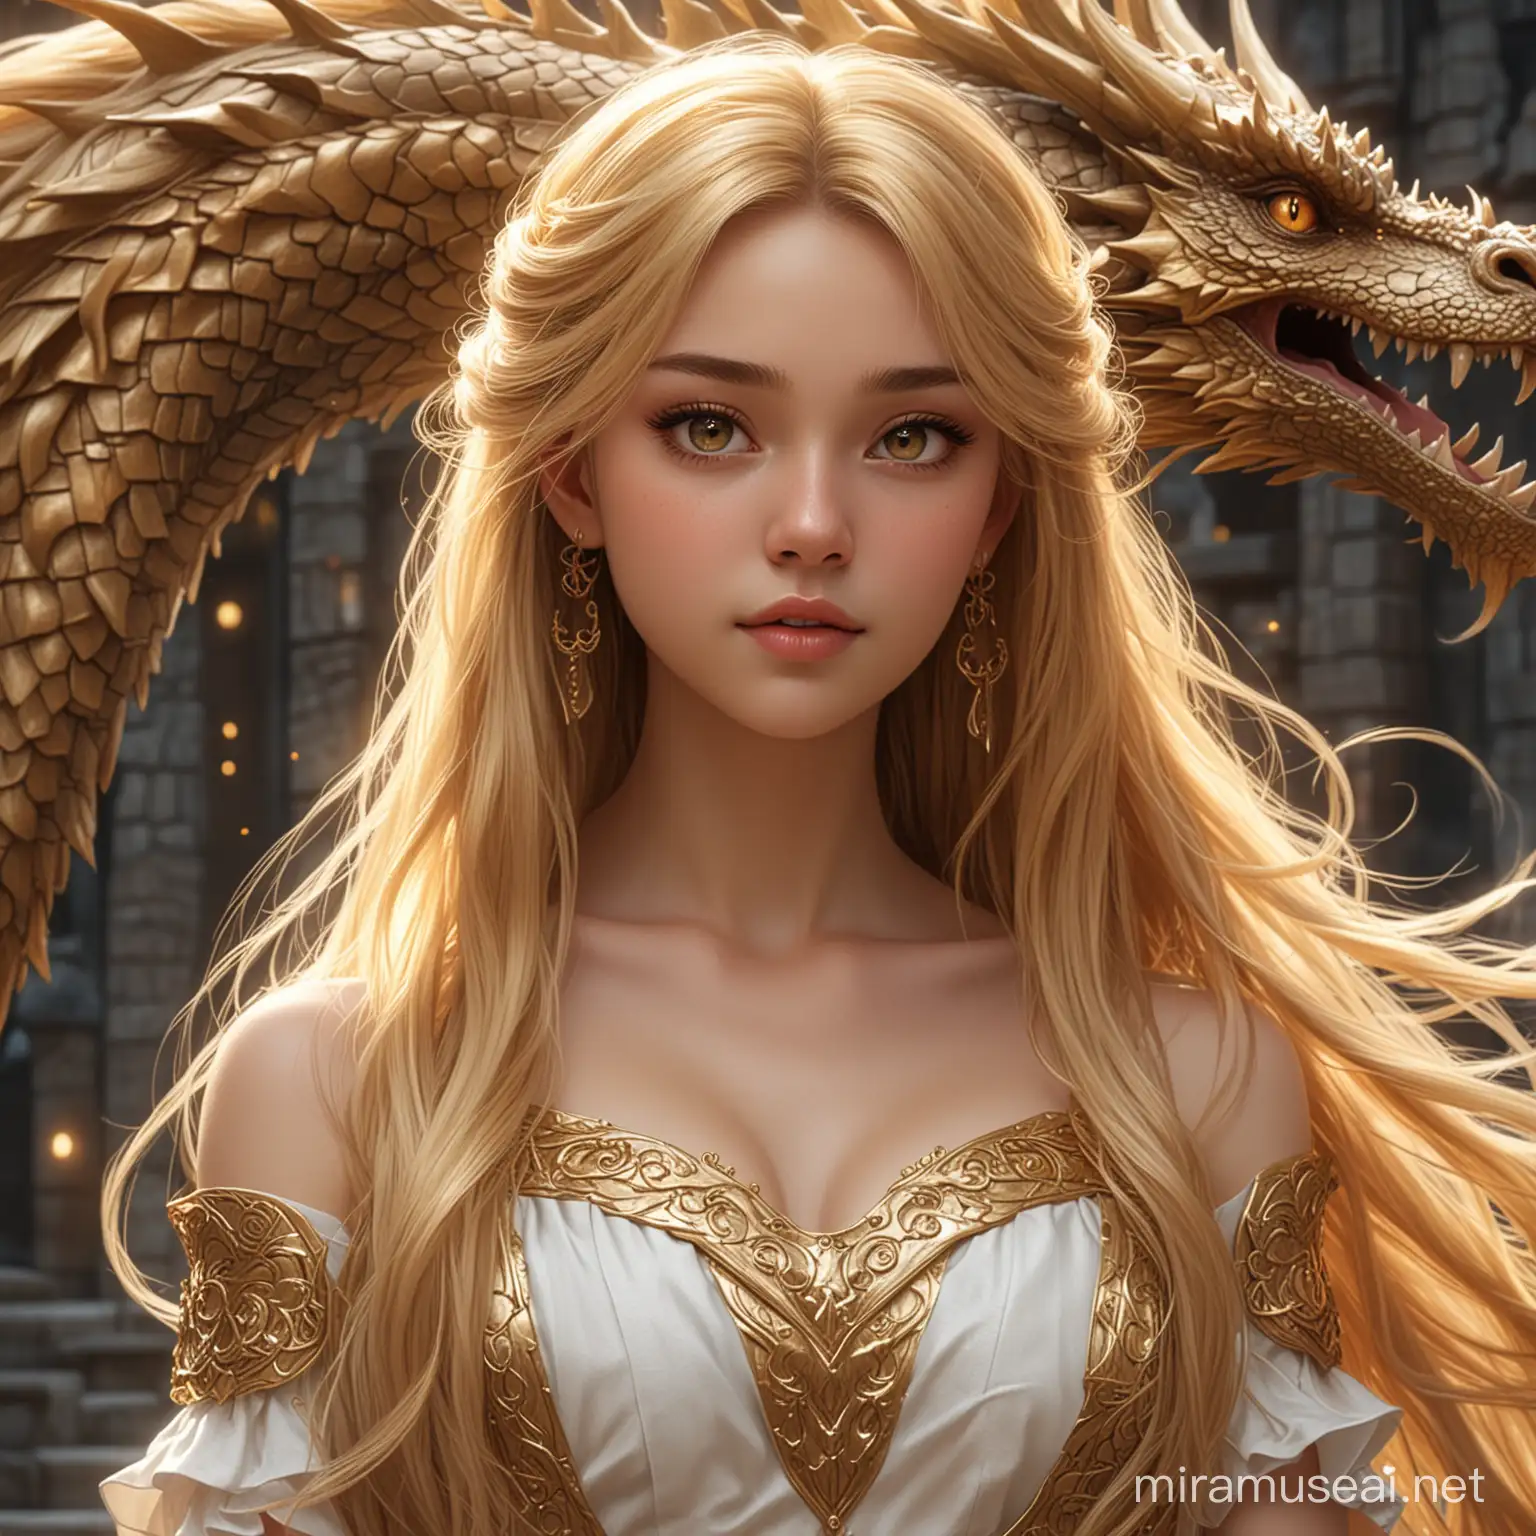 Princess girl, long golden hair, magic dress, dragon on the background, anime realism art, realistic faces, illustrations in the style of fantasy mythology, cinematic, detailed texture, i-max resolution, hyperrealistic, 